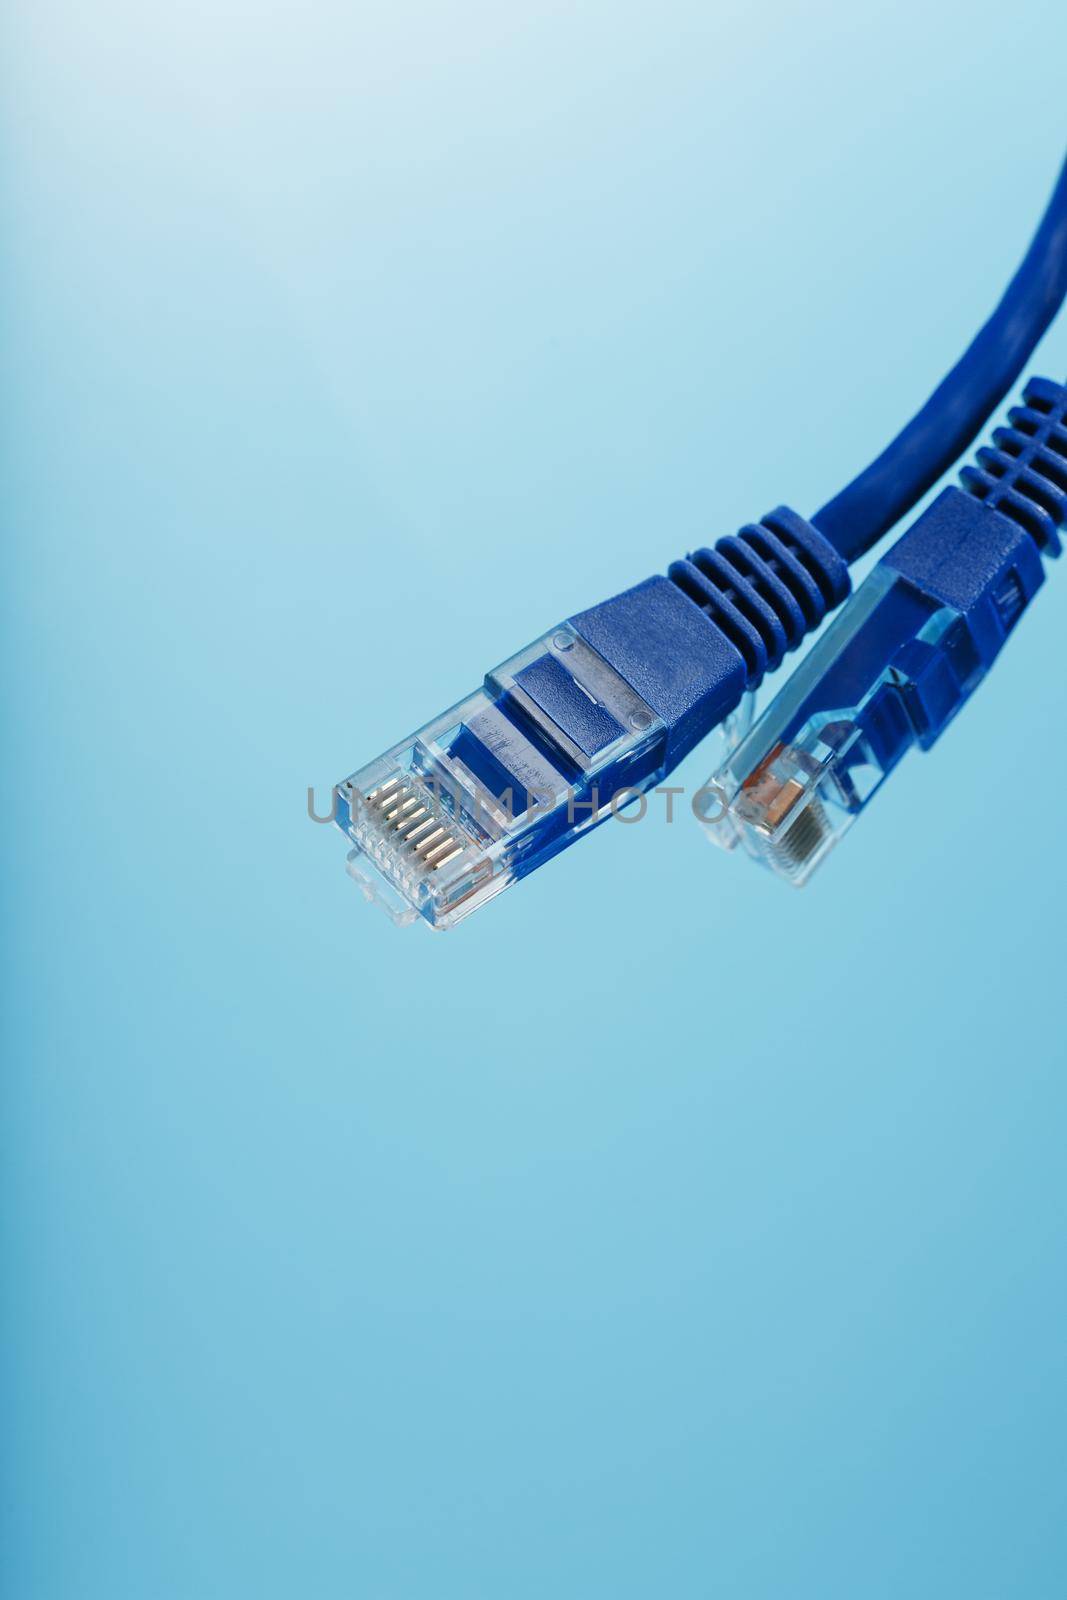 Ethernet Cable connector Patch cord cord close-up on a blue background with free space by AlexGrec